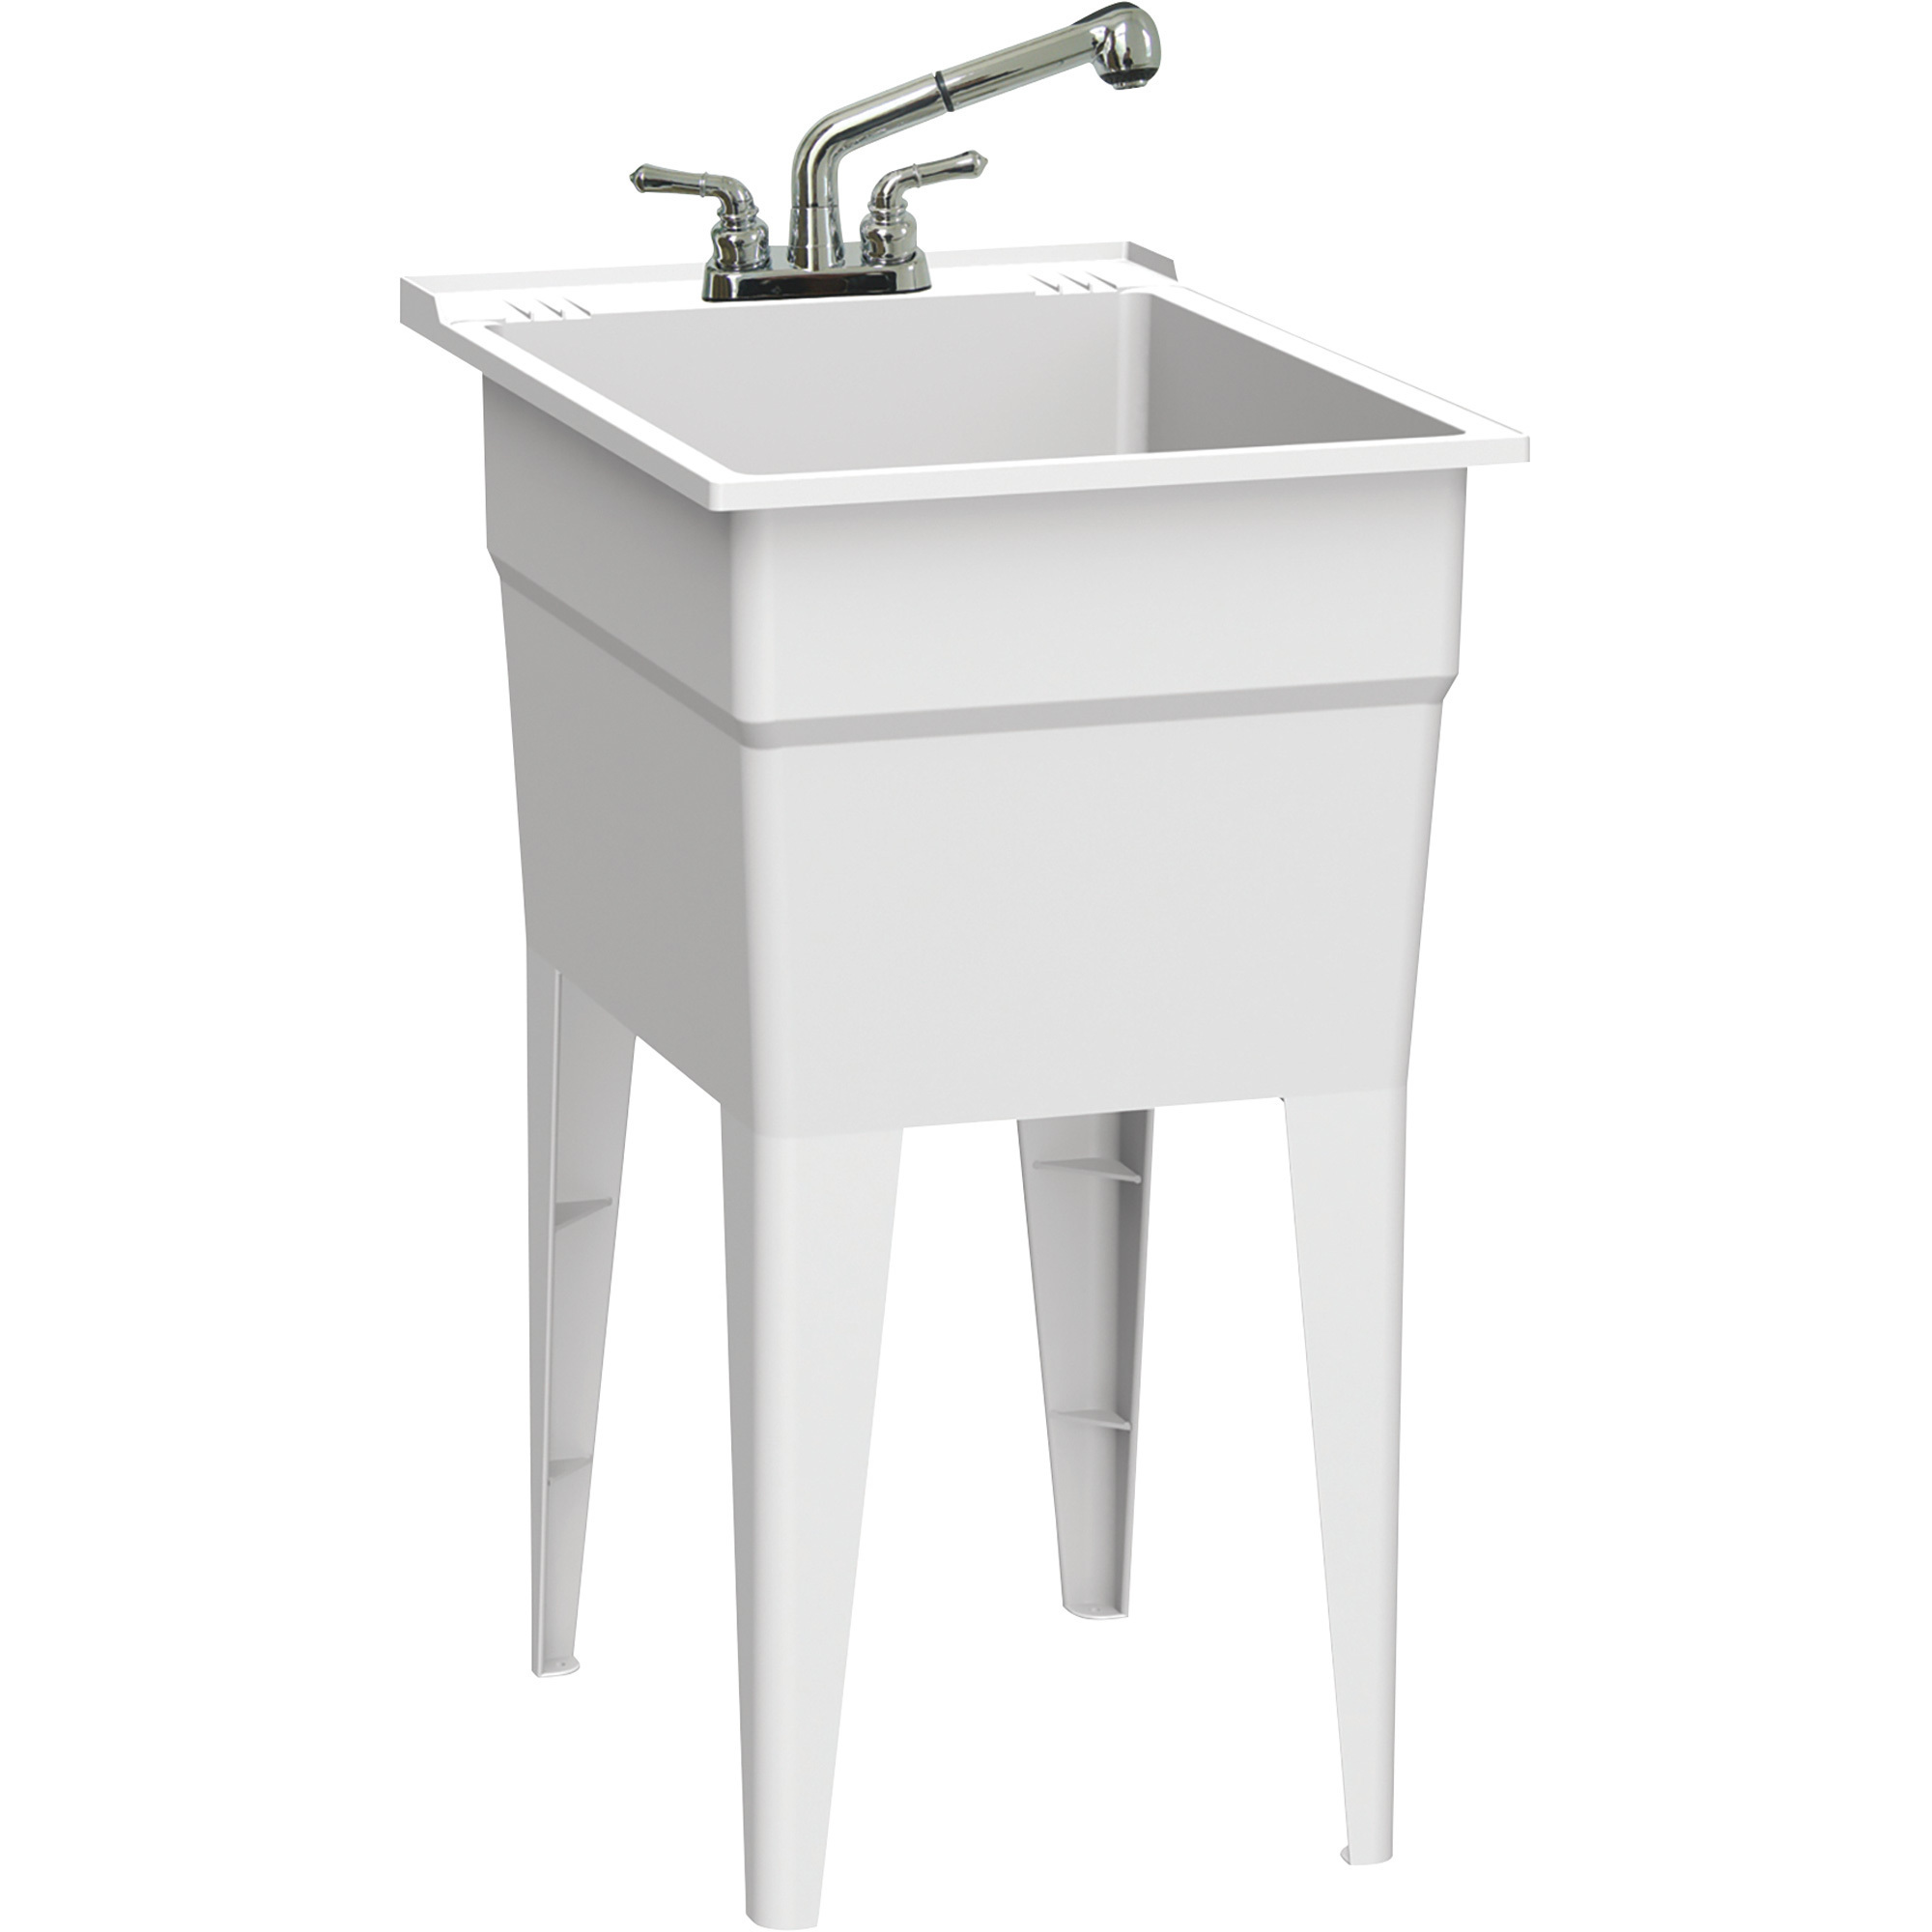 Rugged Tub Garage Sink with Pull-Out Faucet â 18Inch W, White, Polypropylene, Model N52WK1